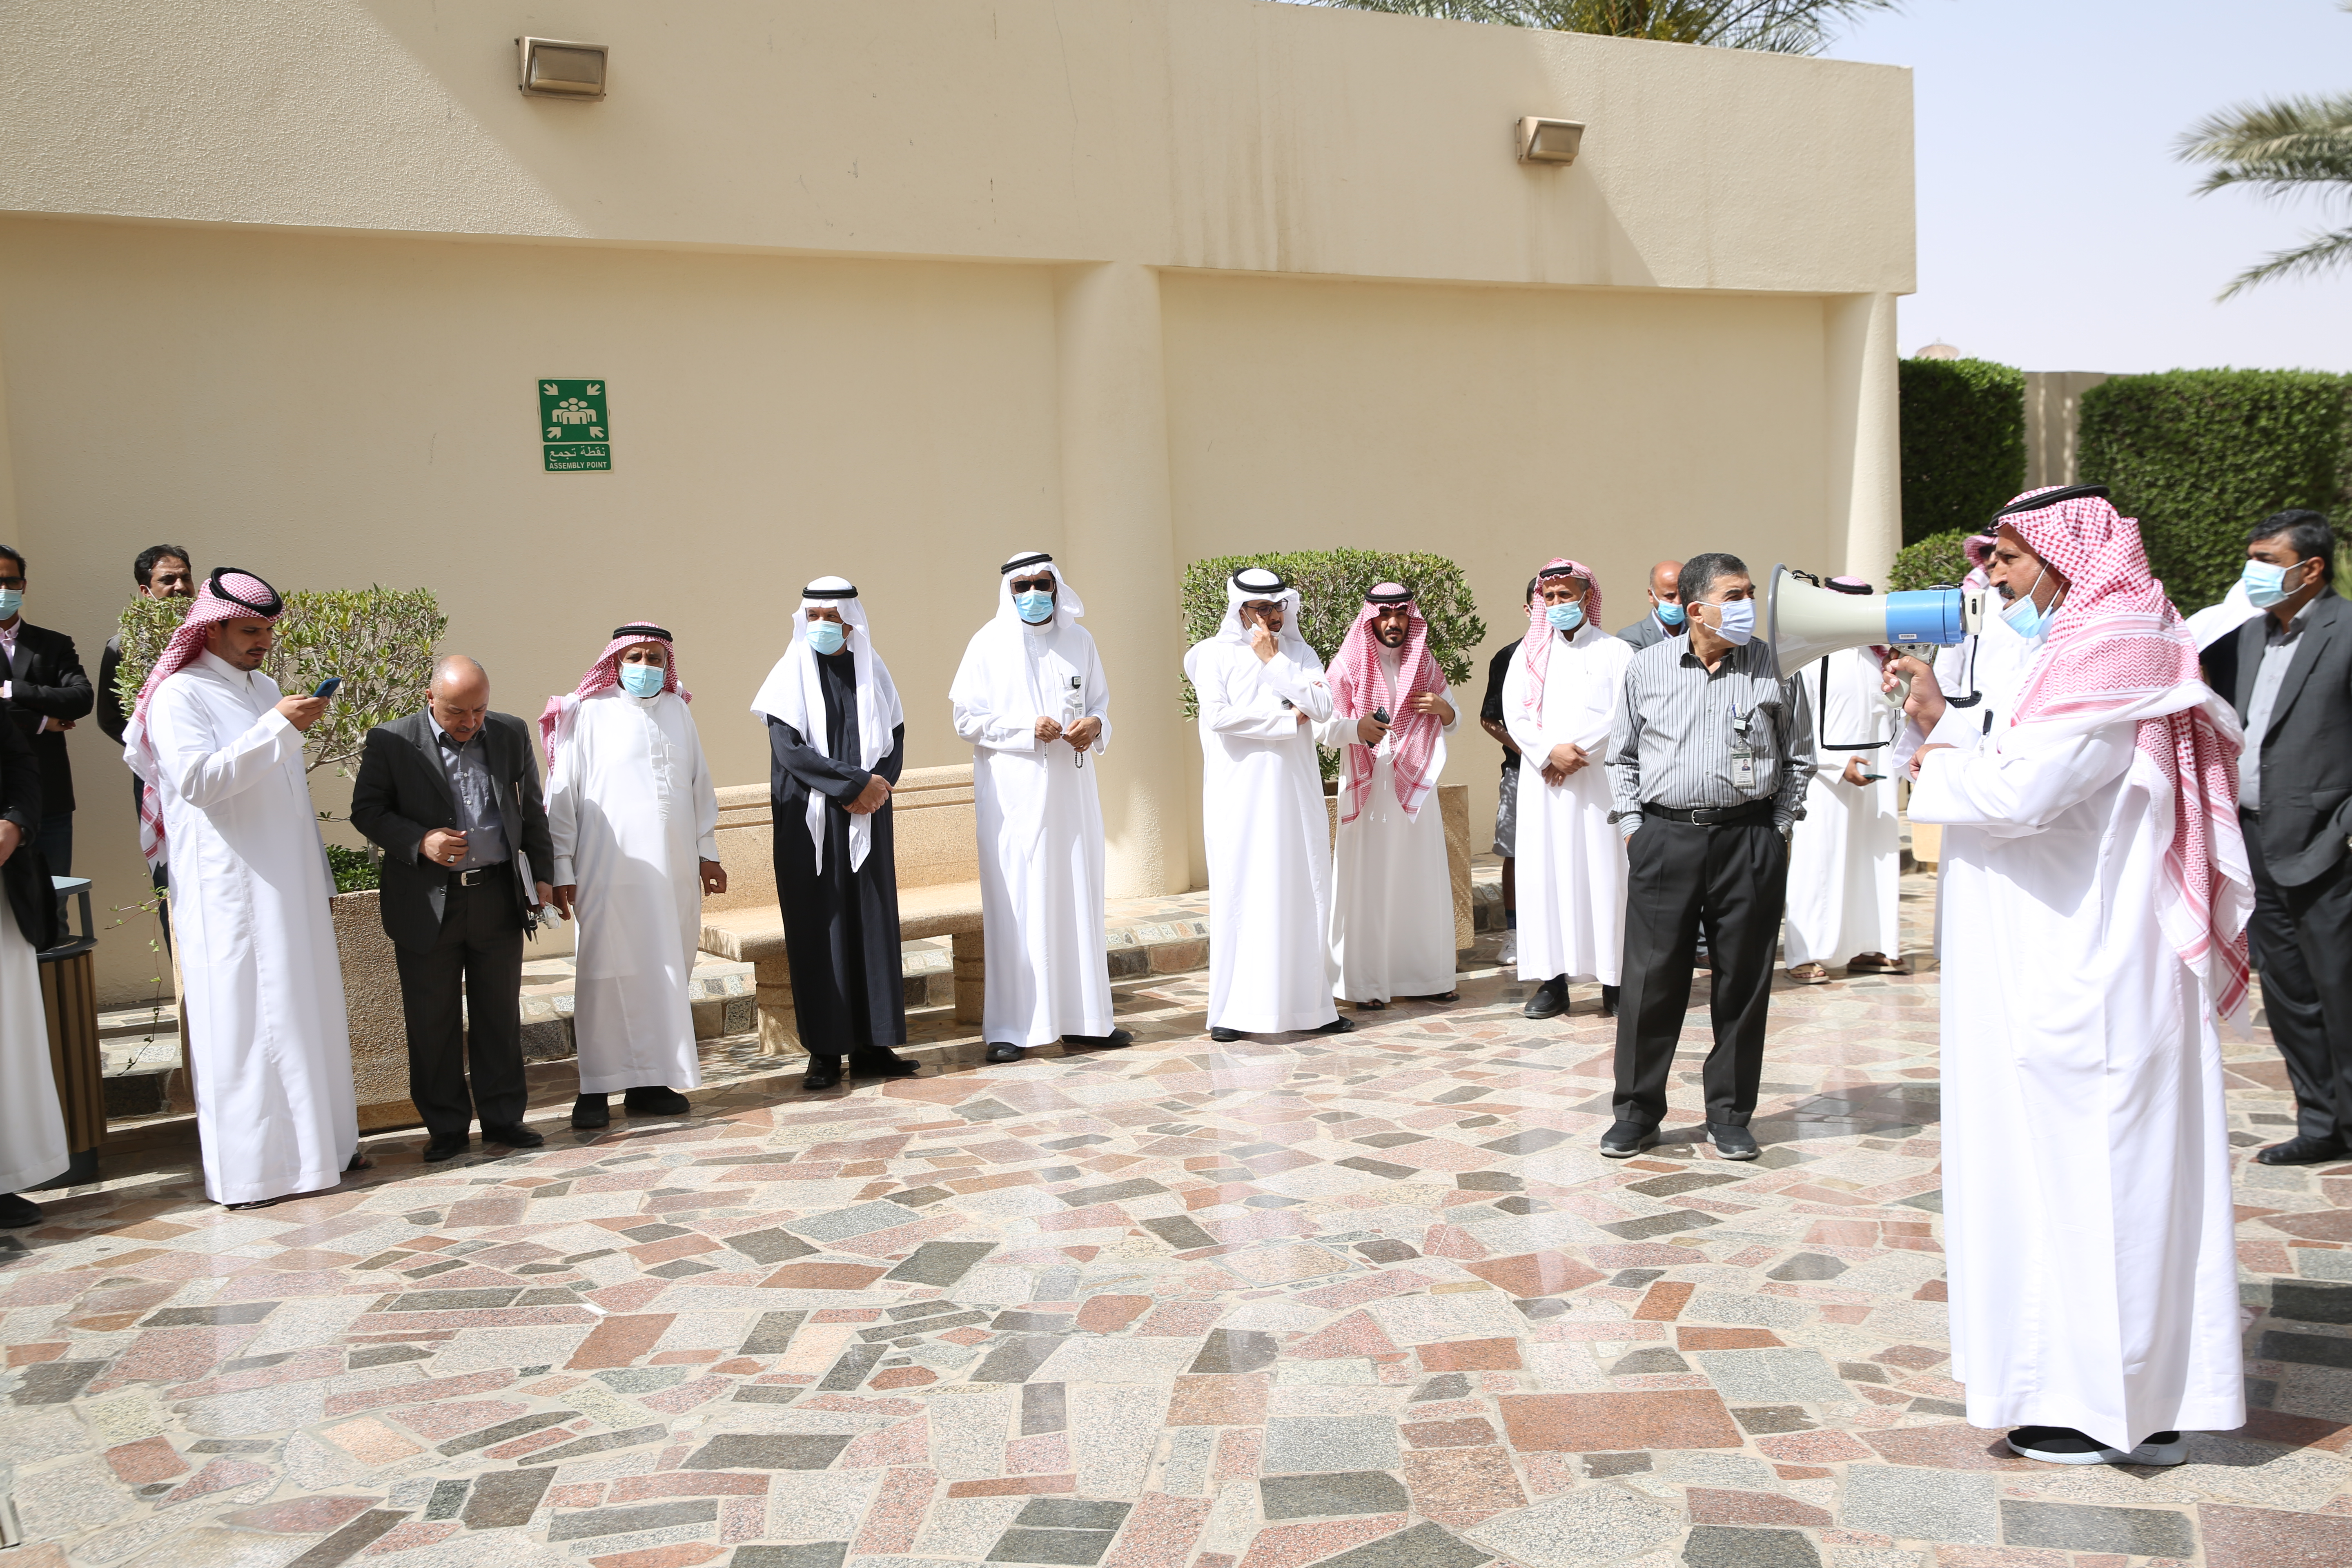 DAU’s Security & Safety Department, DQ, Carries out Emergency Evacuation Drill